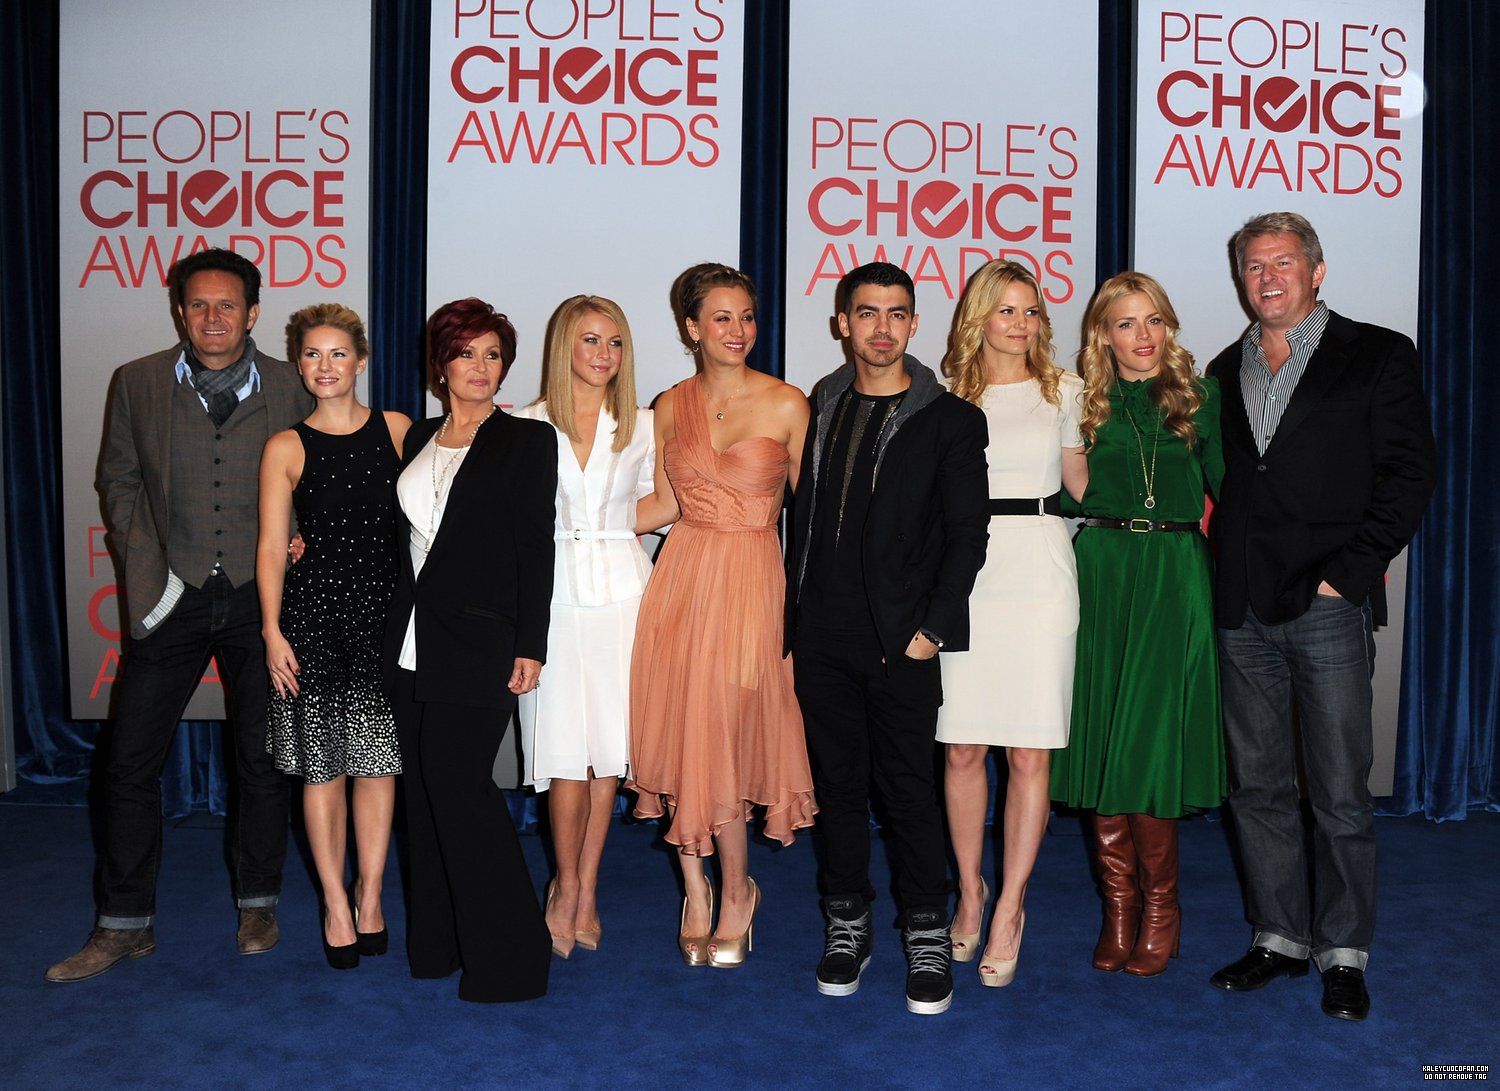 PEOPLES CHOICE AWARDS 2012 Nominees Announcement - Kaley Cuoco Photo ...